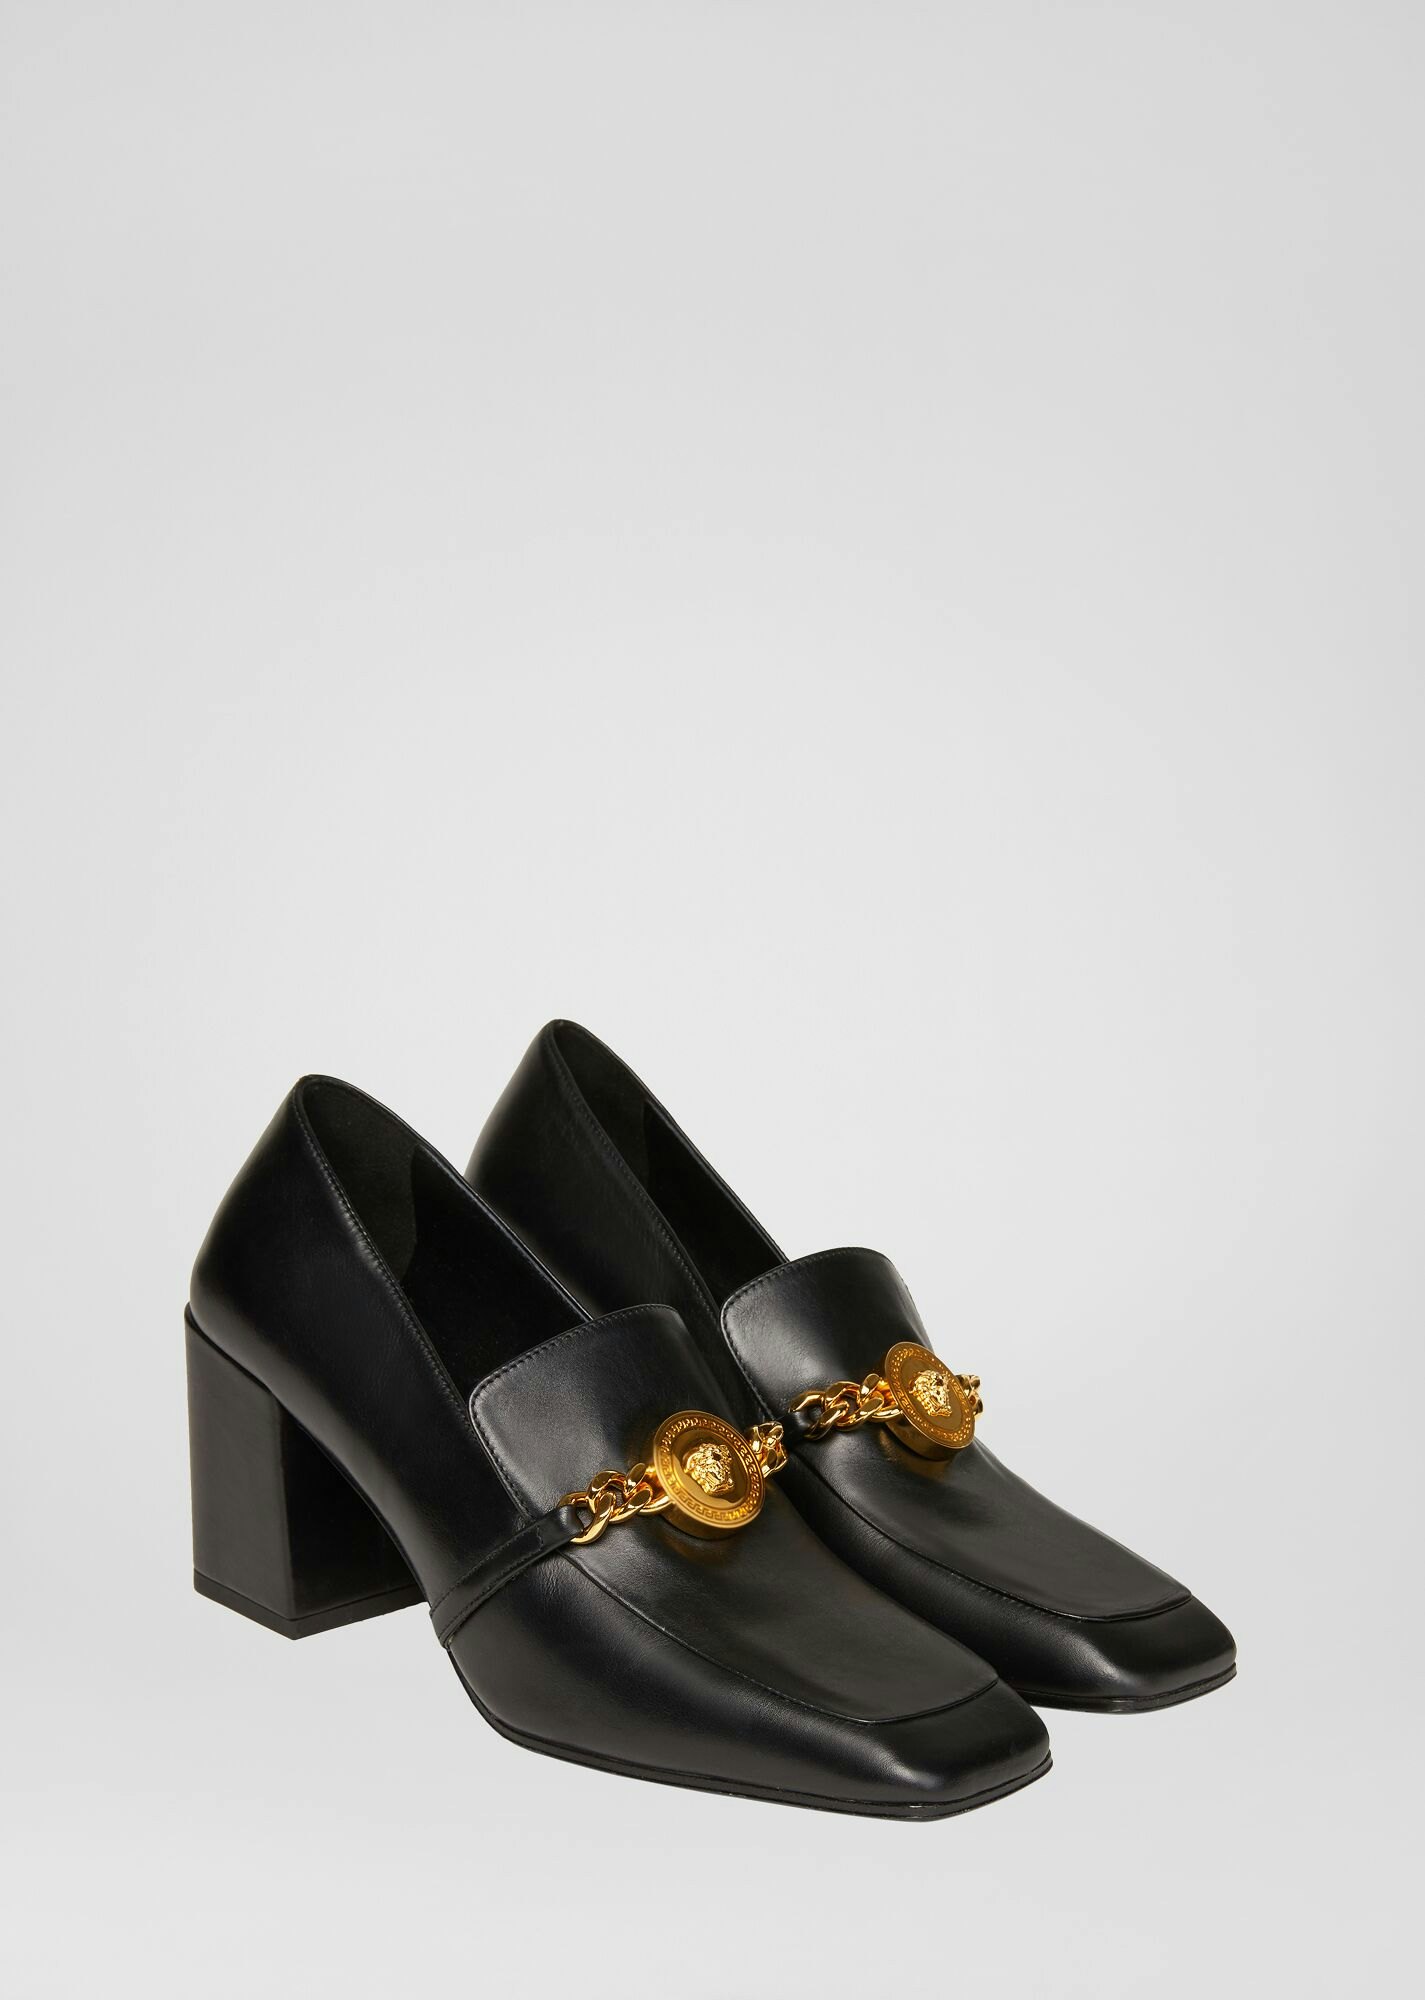 versace loafers womens